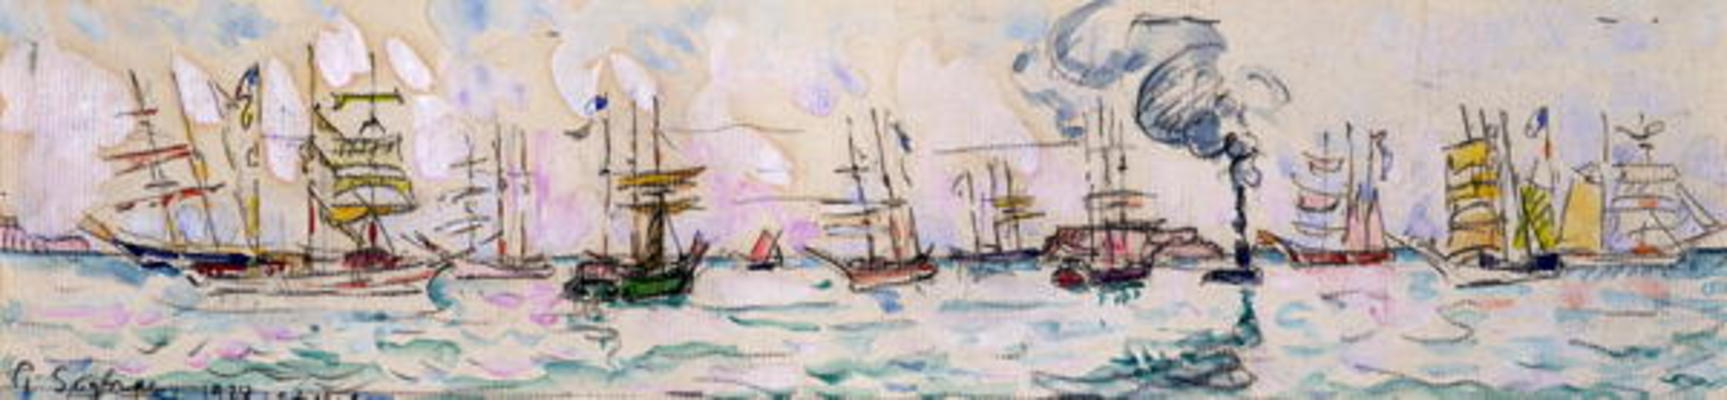 The Departure of the Fishing Trawlers to Newfoundland, 1928 (w/c on paper) a Paul Signac